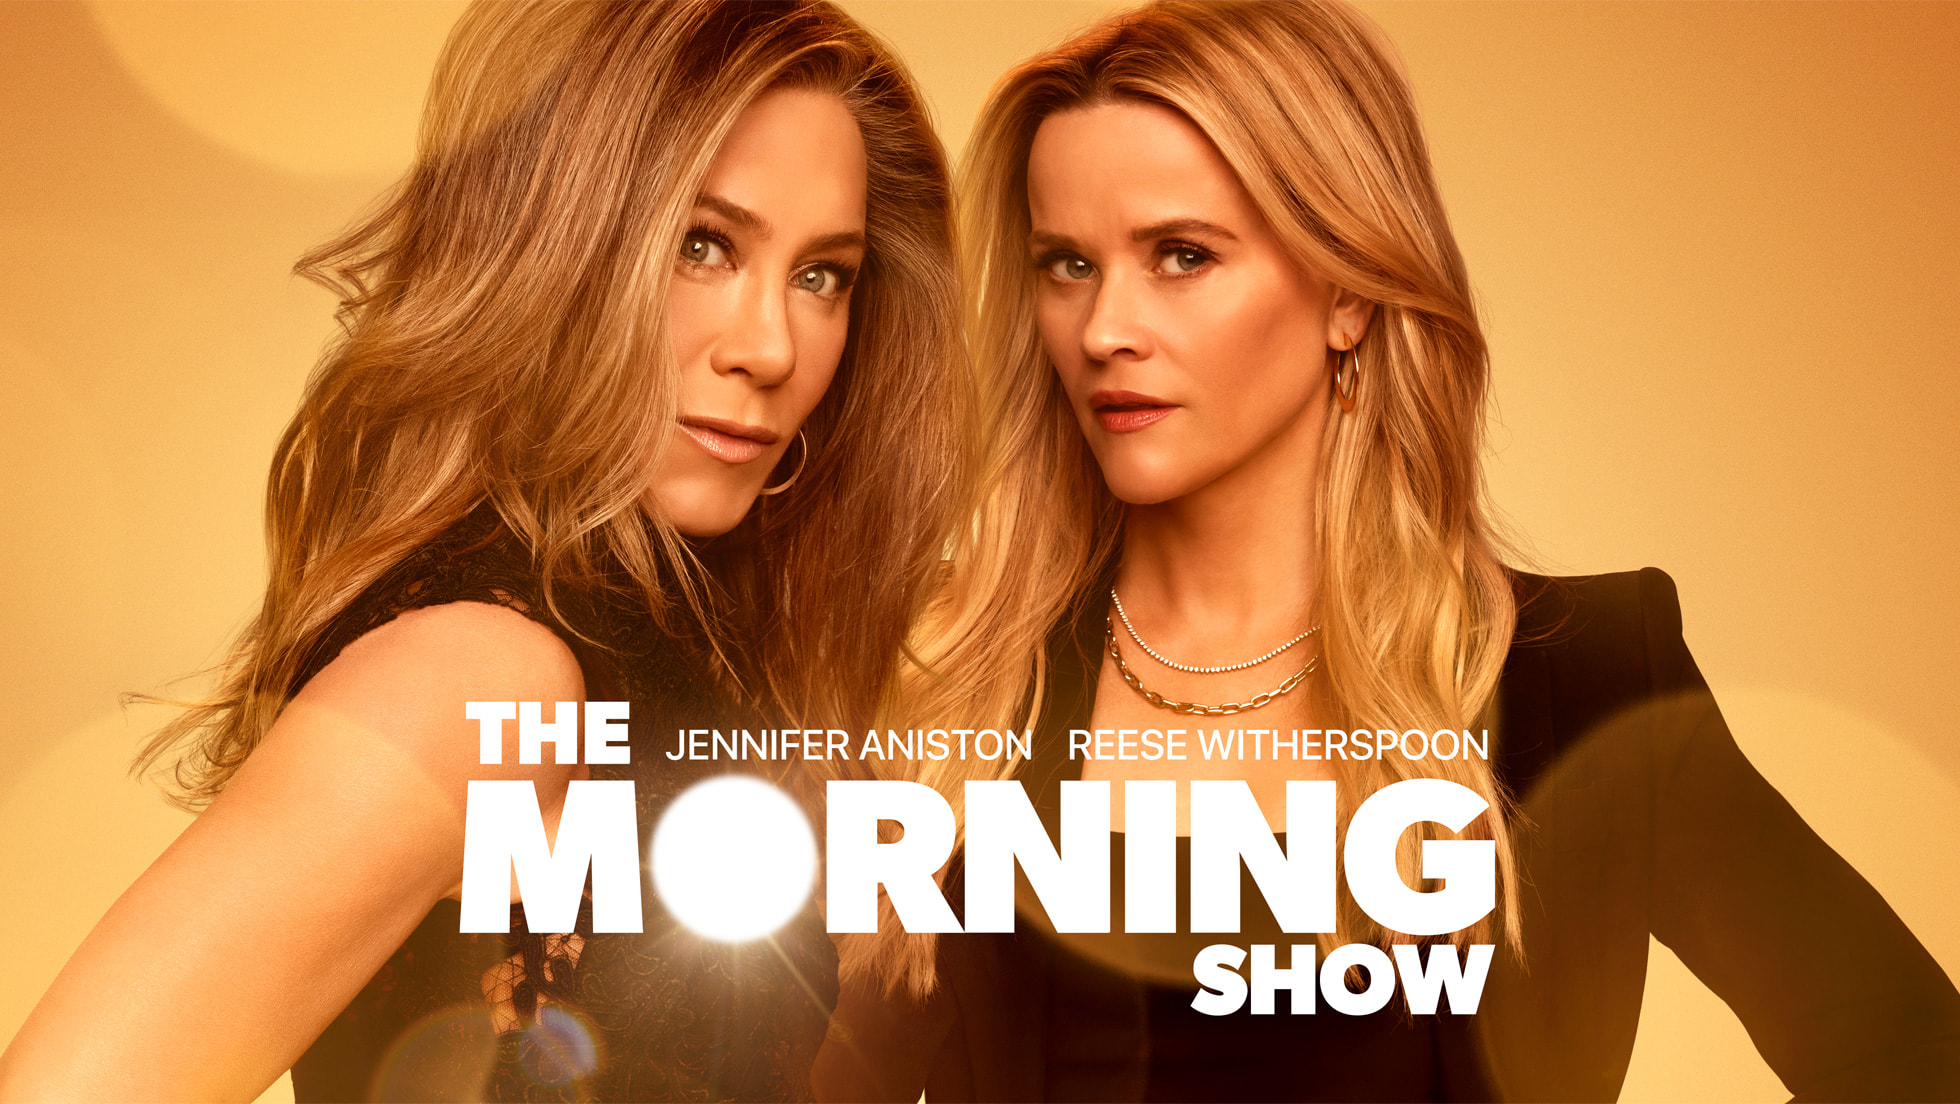 Global hit “The Morning Show” leads most-nominated series for the 29th Annual Critics Choice Awards